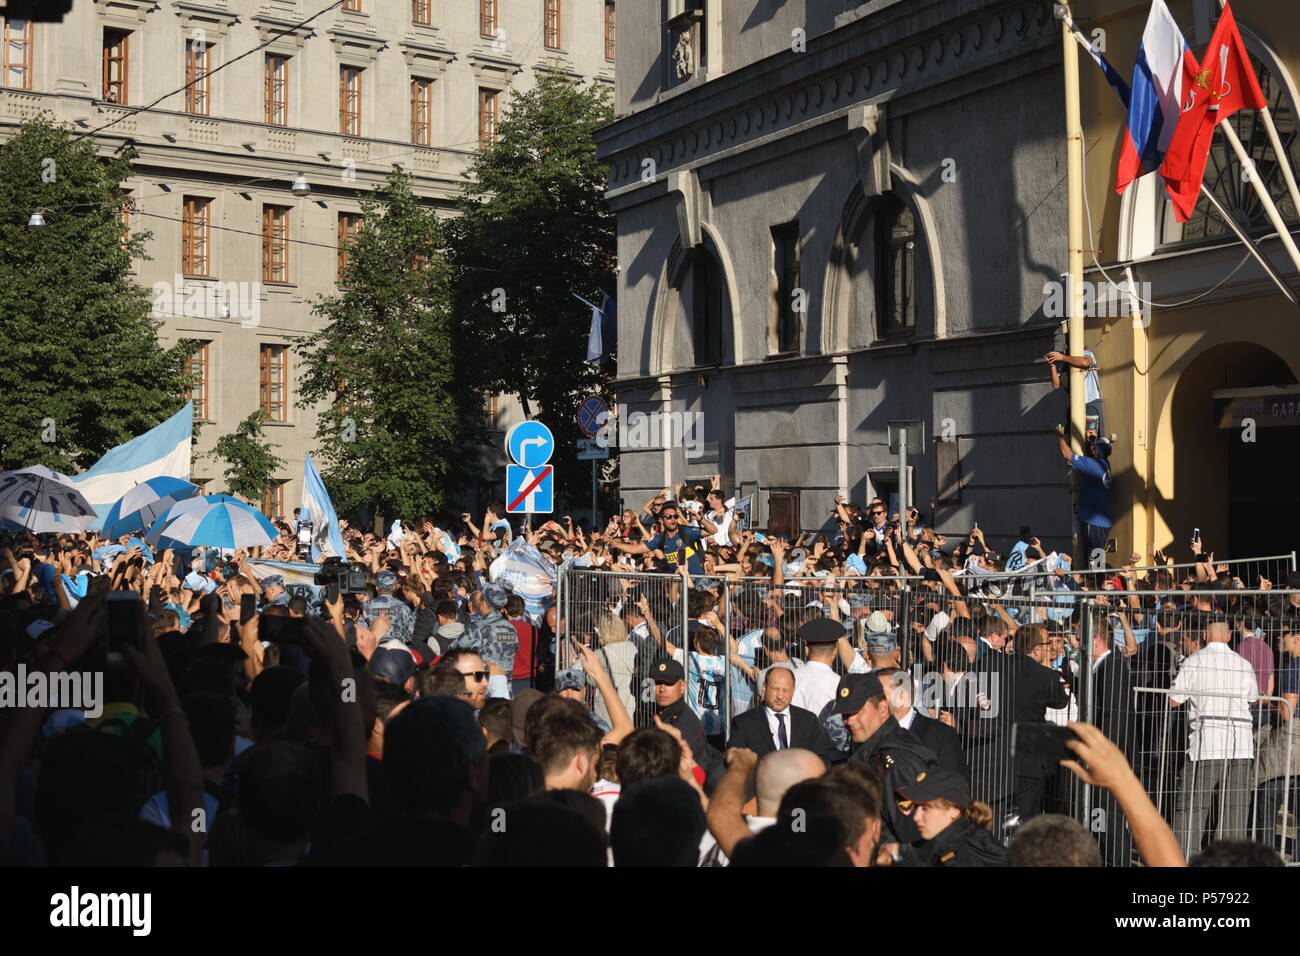 St. Petersburg, Russia, 25th June, 2018. Crowd of Argentinian football fans at Solo Sokos Palace Bridge hotel in Saint-Petersburg where national team player Lionel Messi is stayed, on the day before FIFA World Cup 2018 match Argentina vs Nigeria. The match will be held on Saint Petersburg stadium and will determine whether Argentina will pass into the knockout stage Credit: StockphotoVideo/Alamy Live News Stock Photo